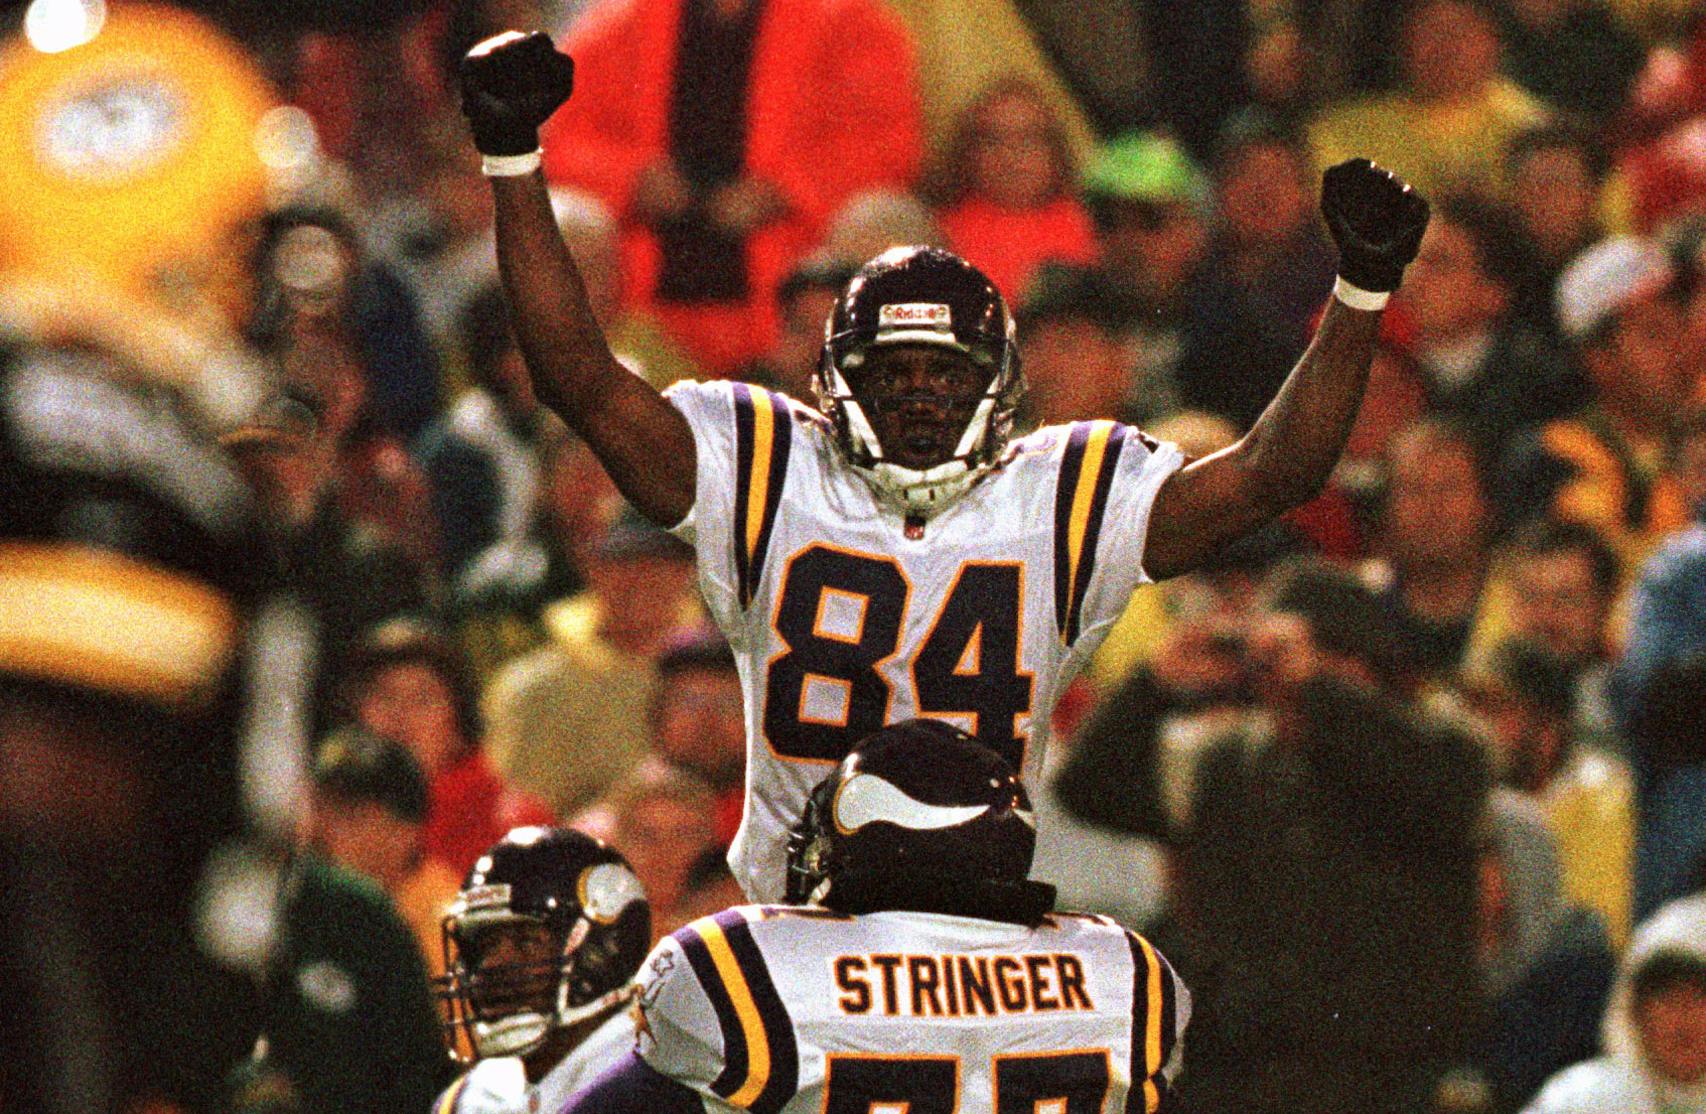 The Vikings' Randy Moss (84) celebrated in the arms of tackle Korey Stringer after catching a touchdown pass against Green Bay.